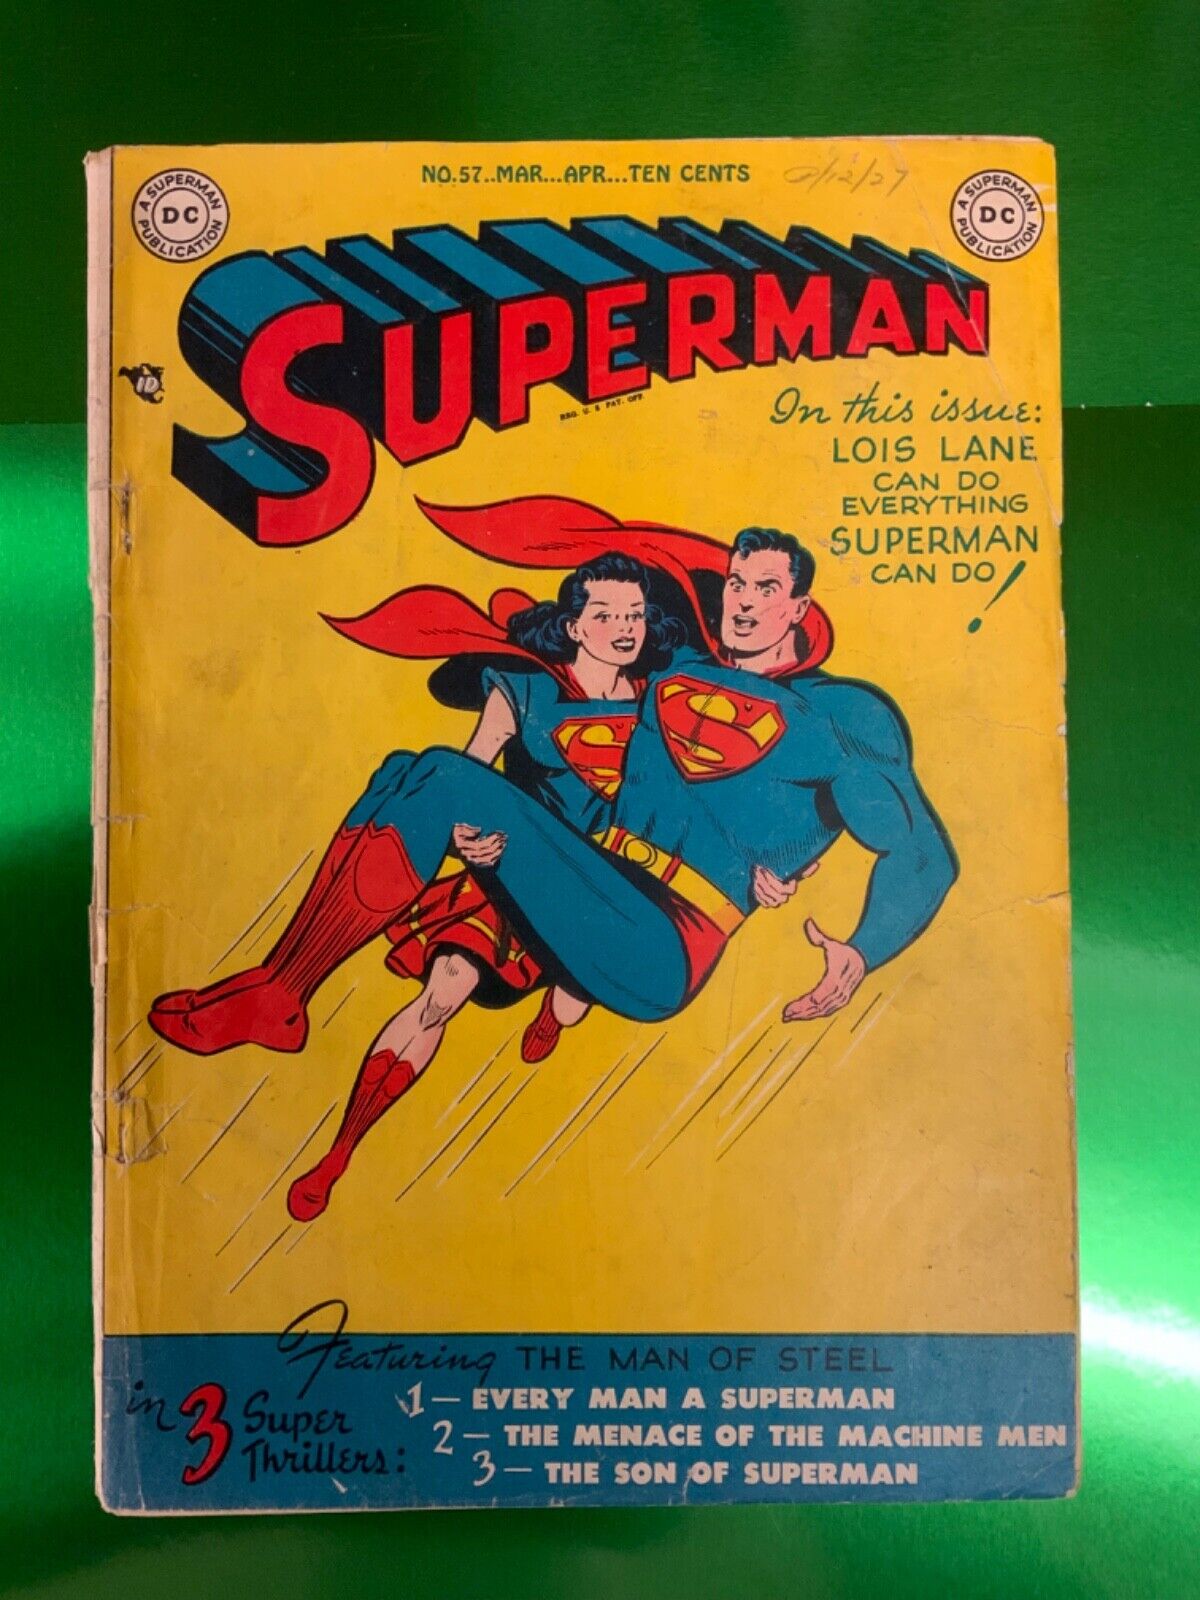 SUPERMAN #57 National 1949 SUPERWOMAN COVER SON OF SUPERMAN COOL ROBOTS STORY